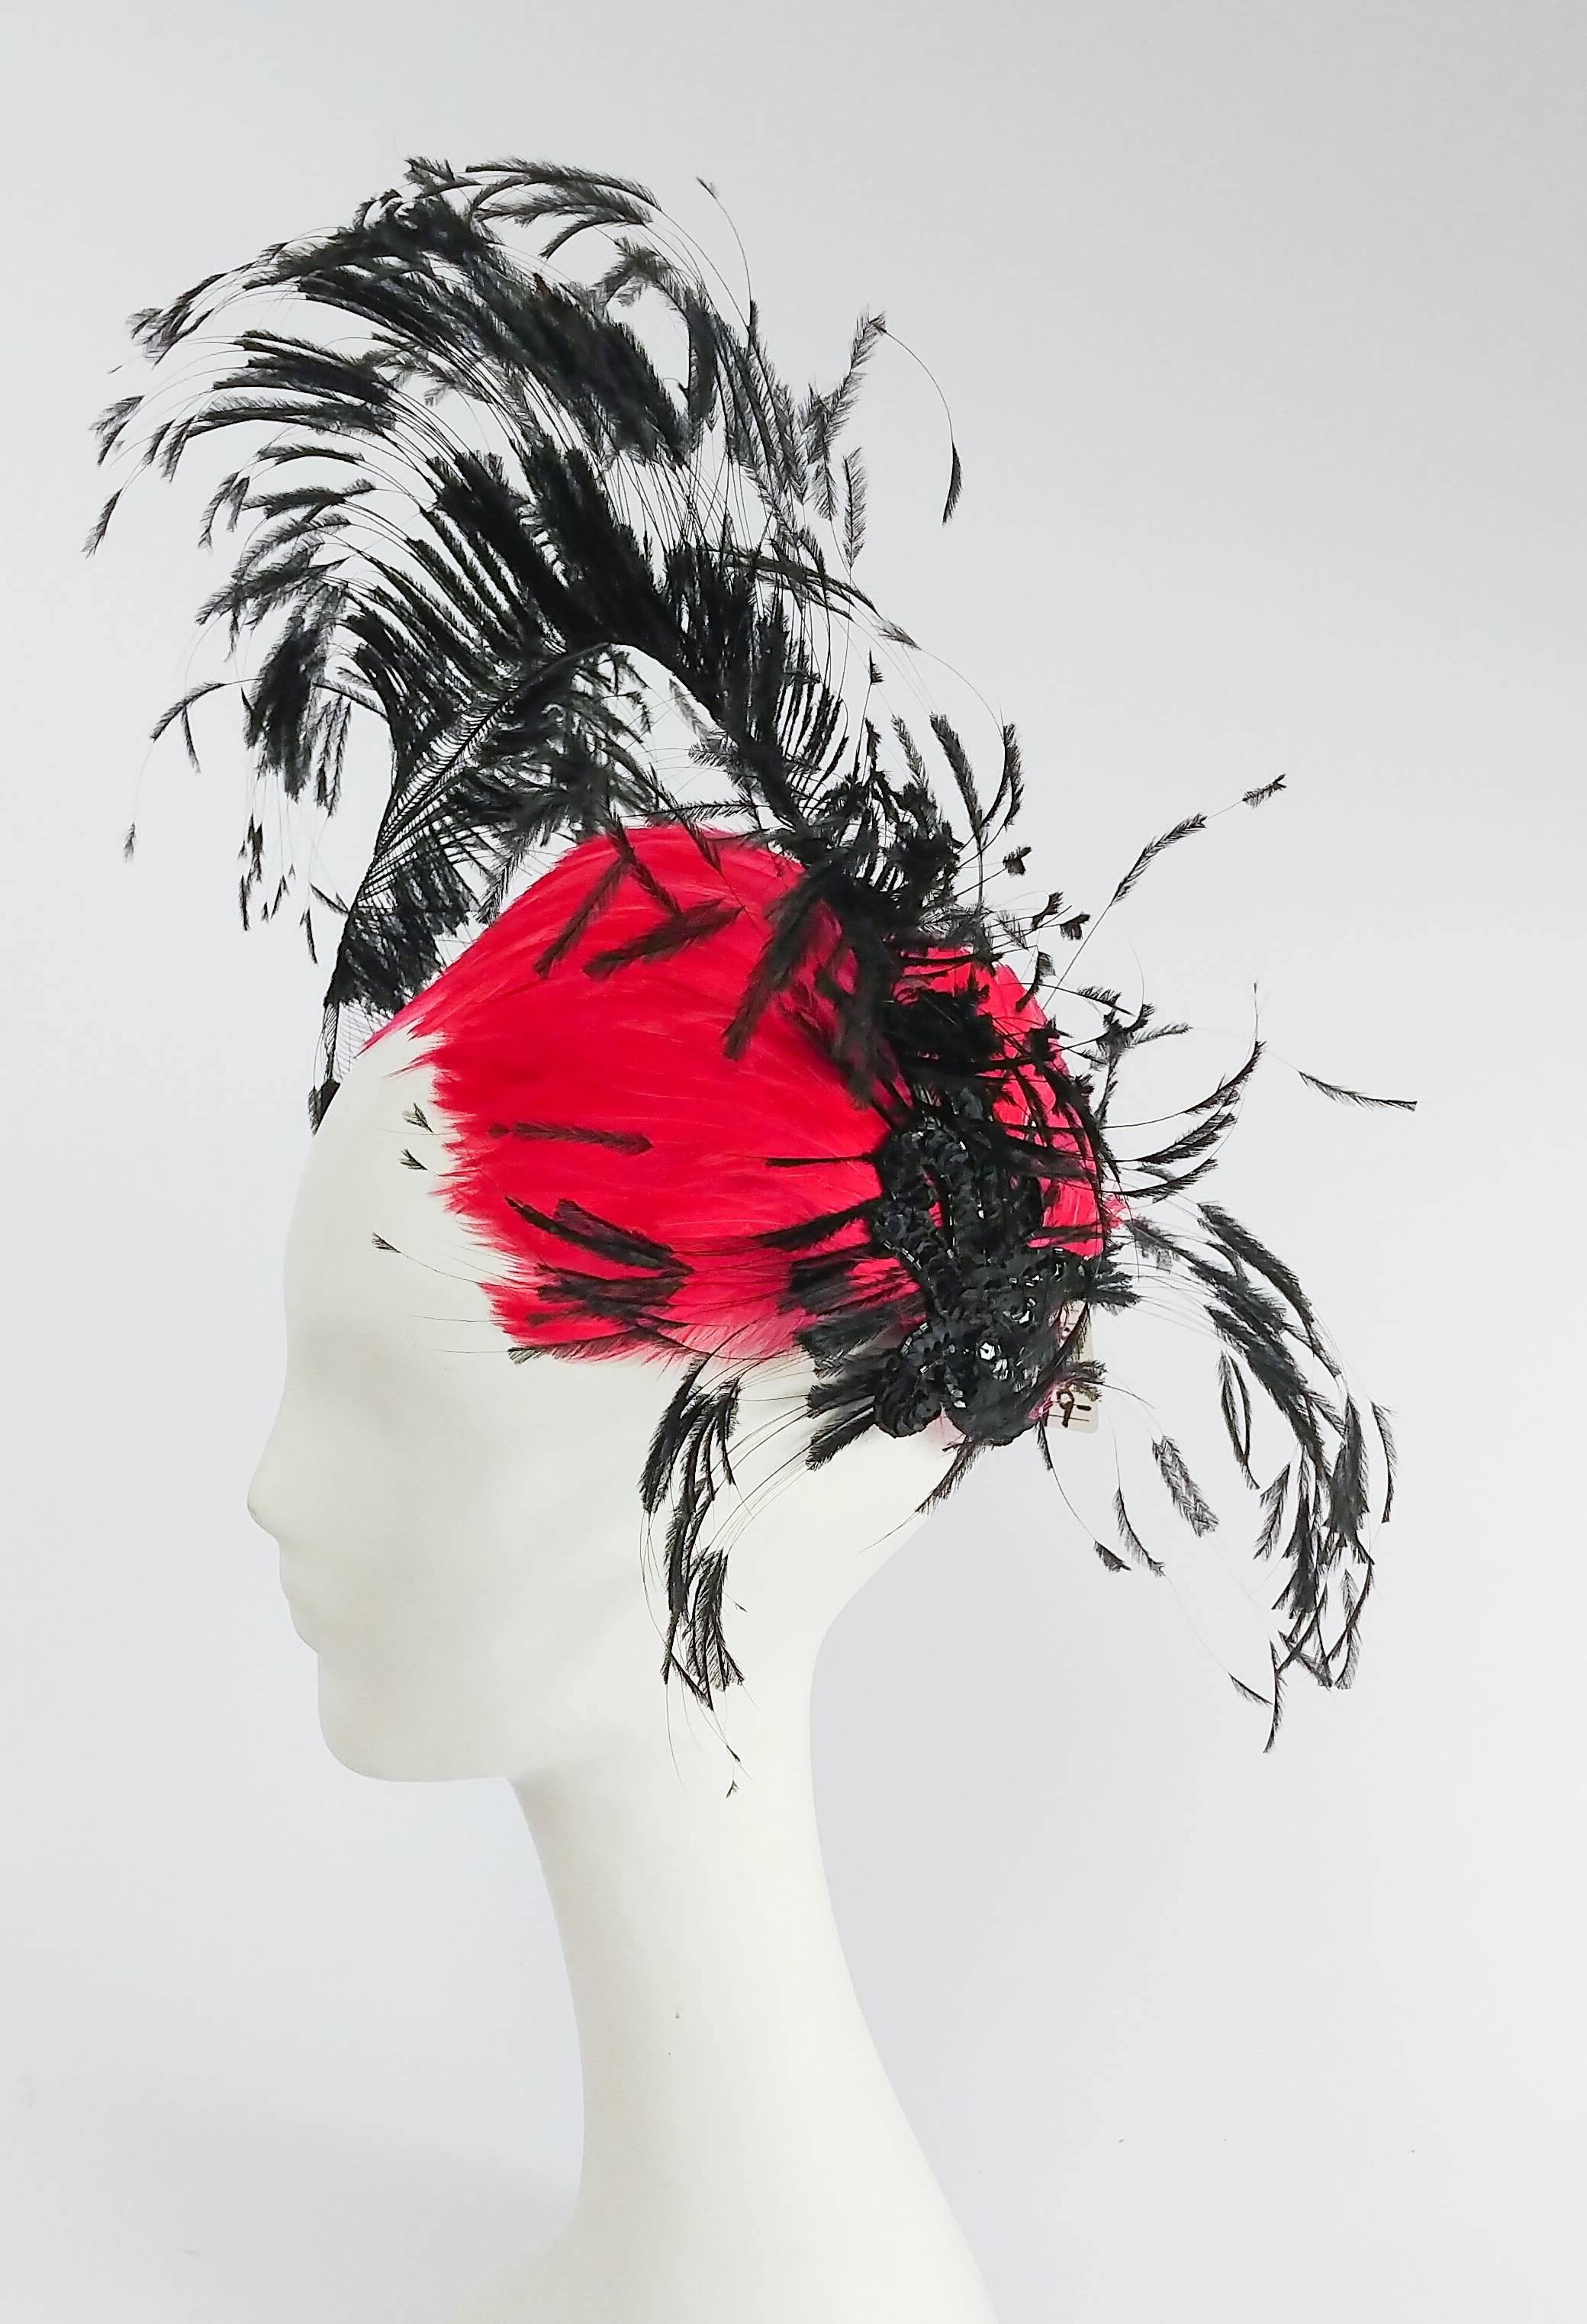 1960s Bright Pink & Black Showstopping Feather Hat. This hat is definitely a statement piece! Embellished with perfect hand-cut and curled black feather with black sequin detailing on the side, this eyecatching pink color will ensure all eyes are on